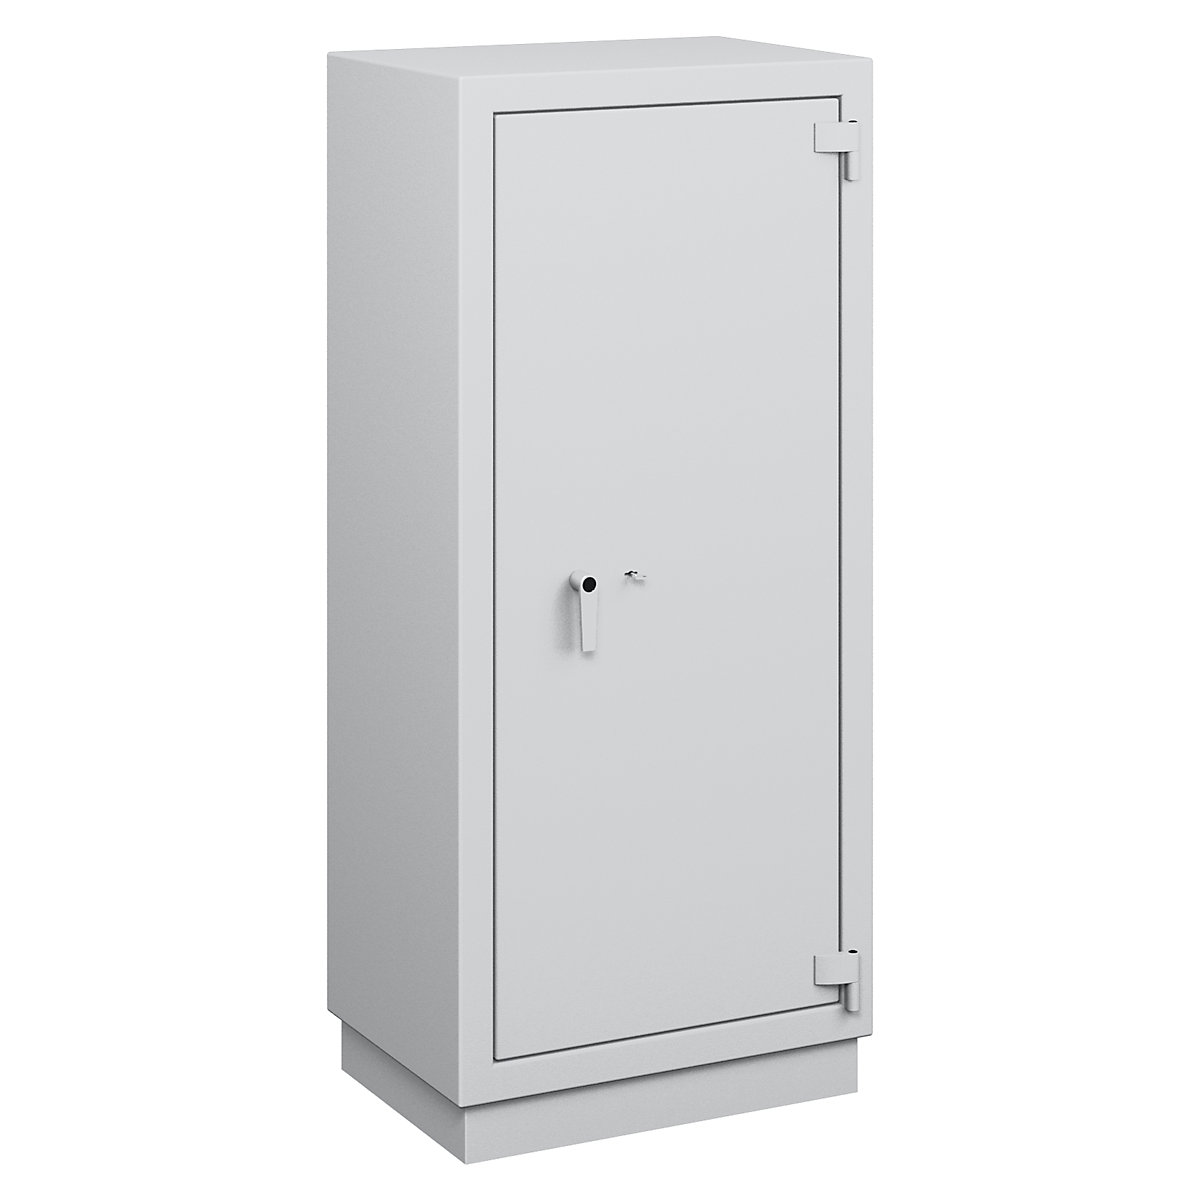 Fire resistant safety cabinet, VDMA B, S2, S 120 P, HxWxD 1800 x 794 x 560 mm-5